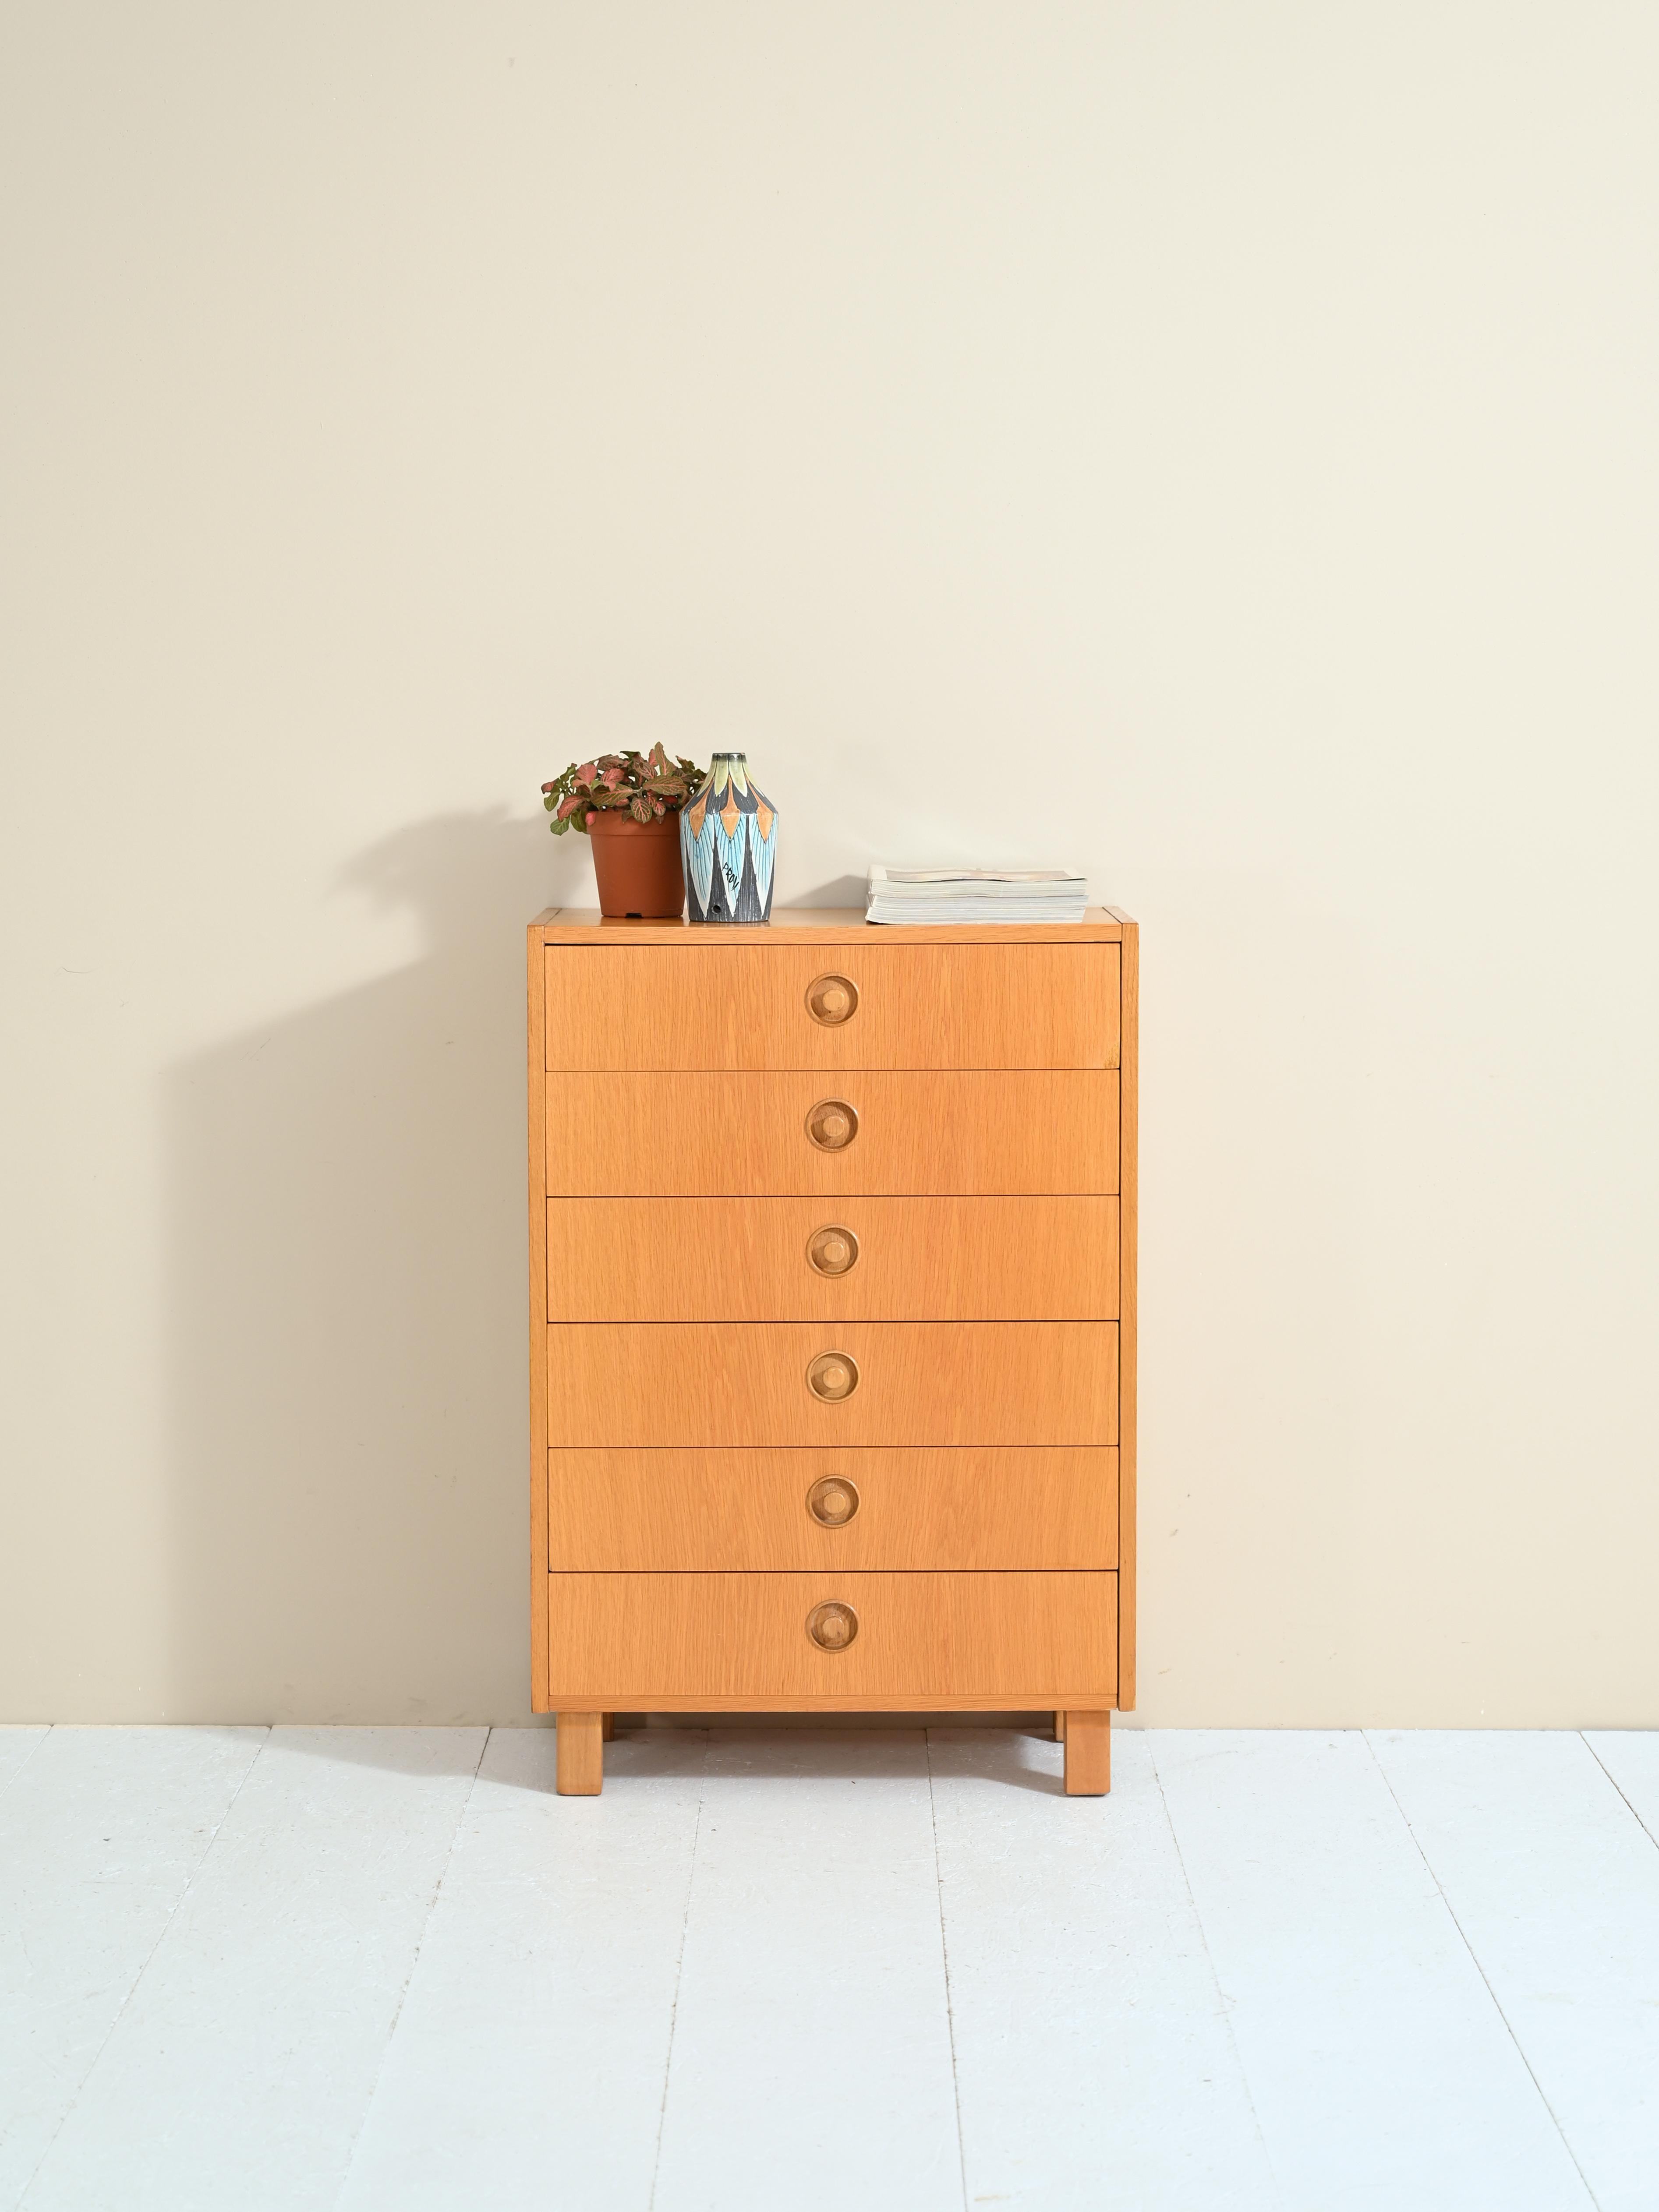 Vintage Scandinavian-made 1960s cabinet with six drawers.
Simple, linear forms for this chest of drawers in warm oak wood tones.
The distinctive handle of the drawers carved into the wood is the distinguishing feature of this cabinet.

Good